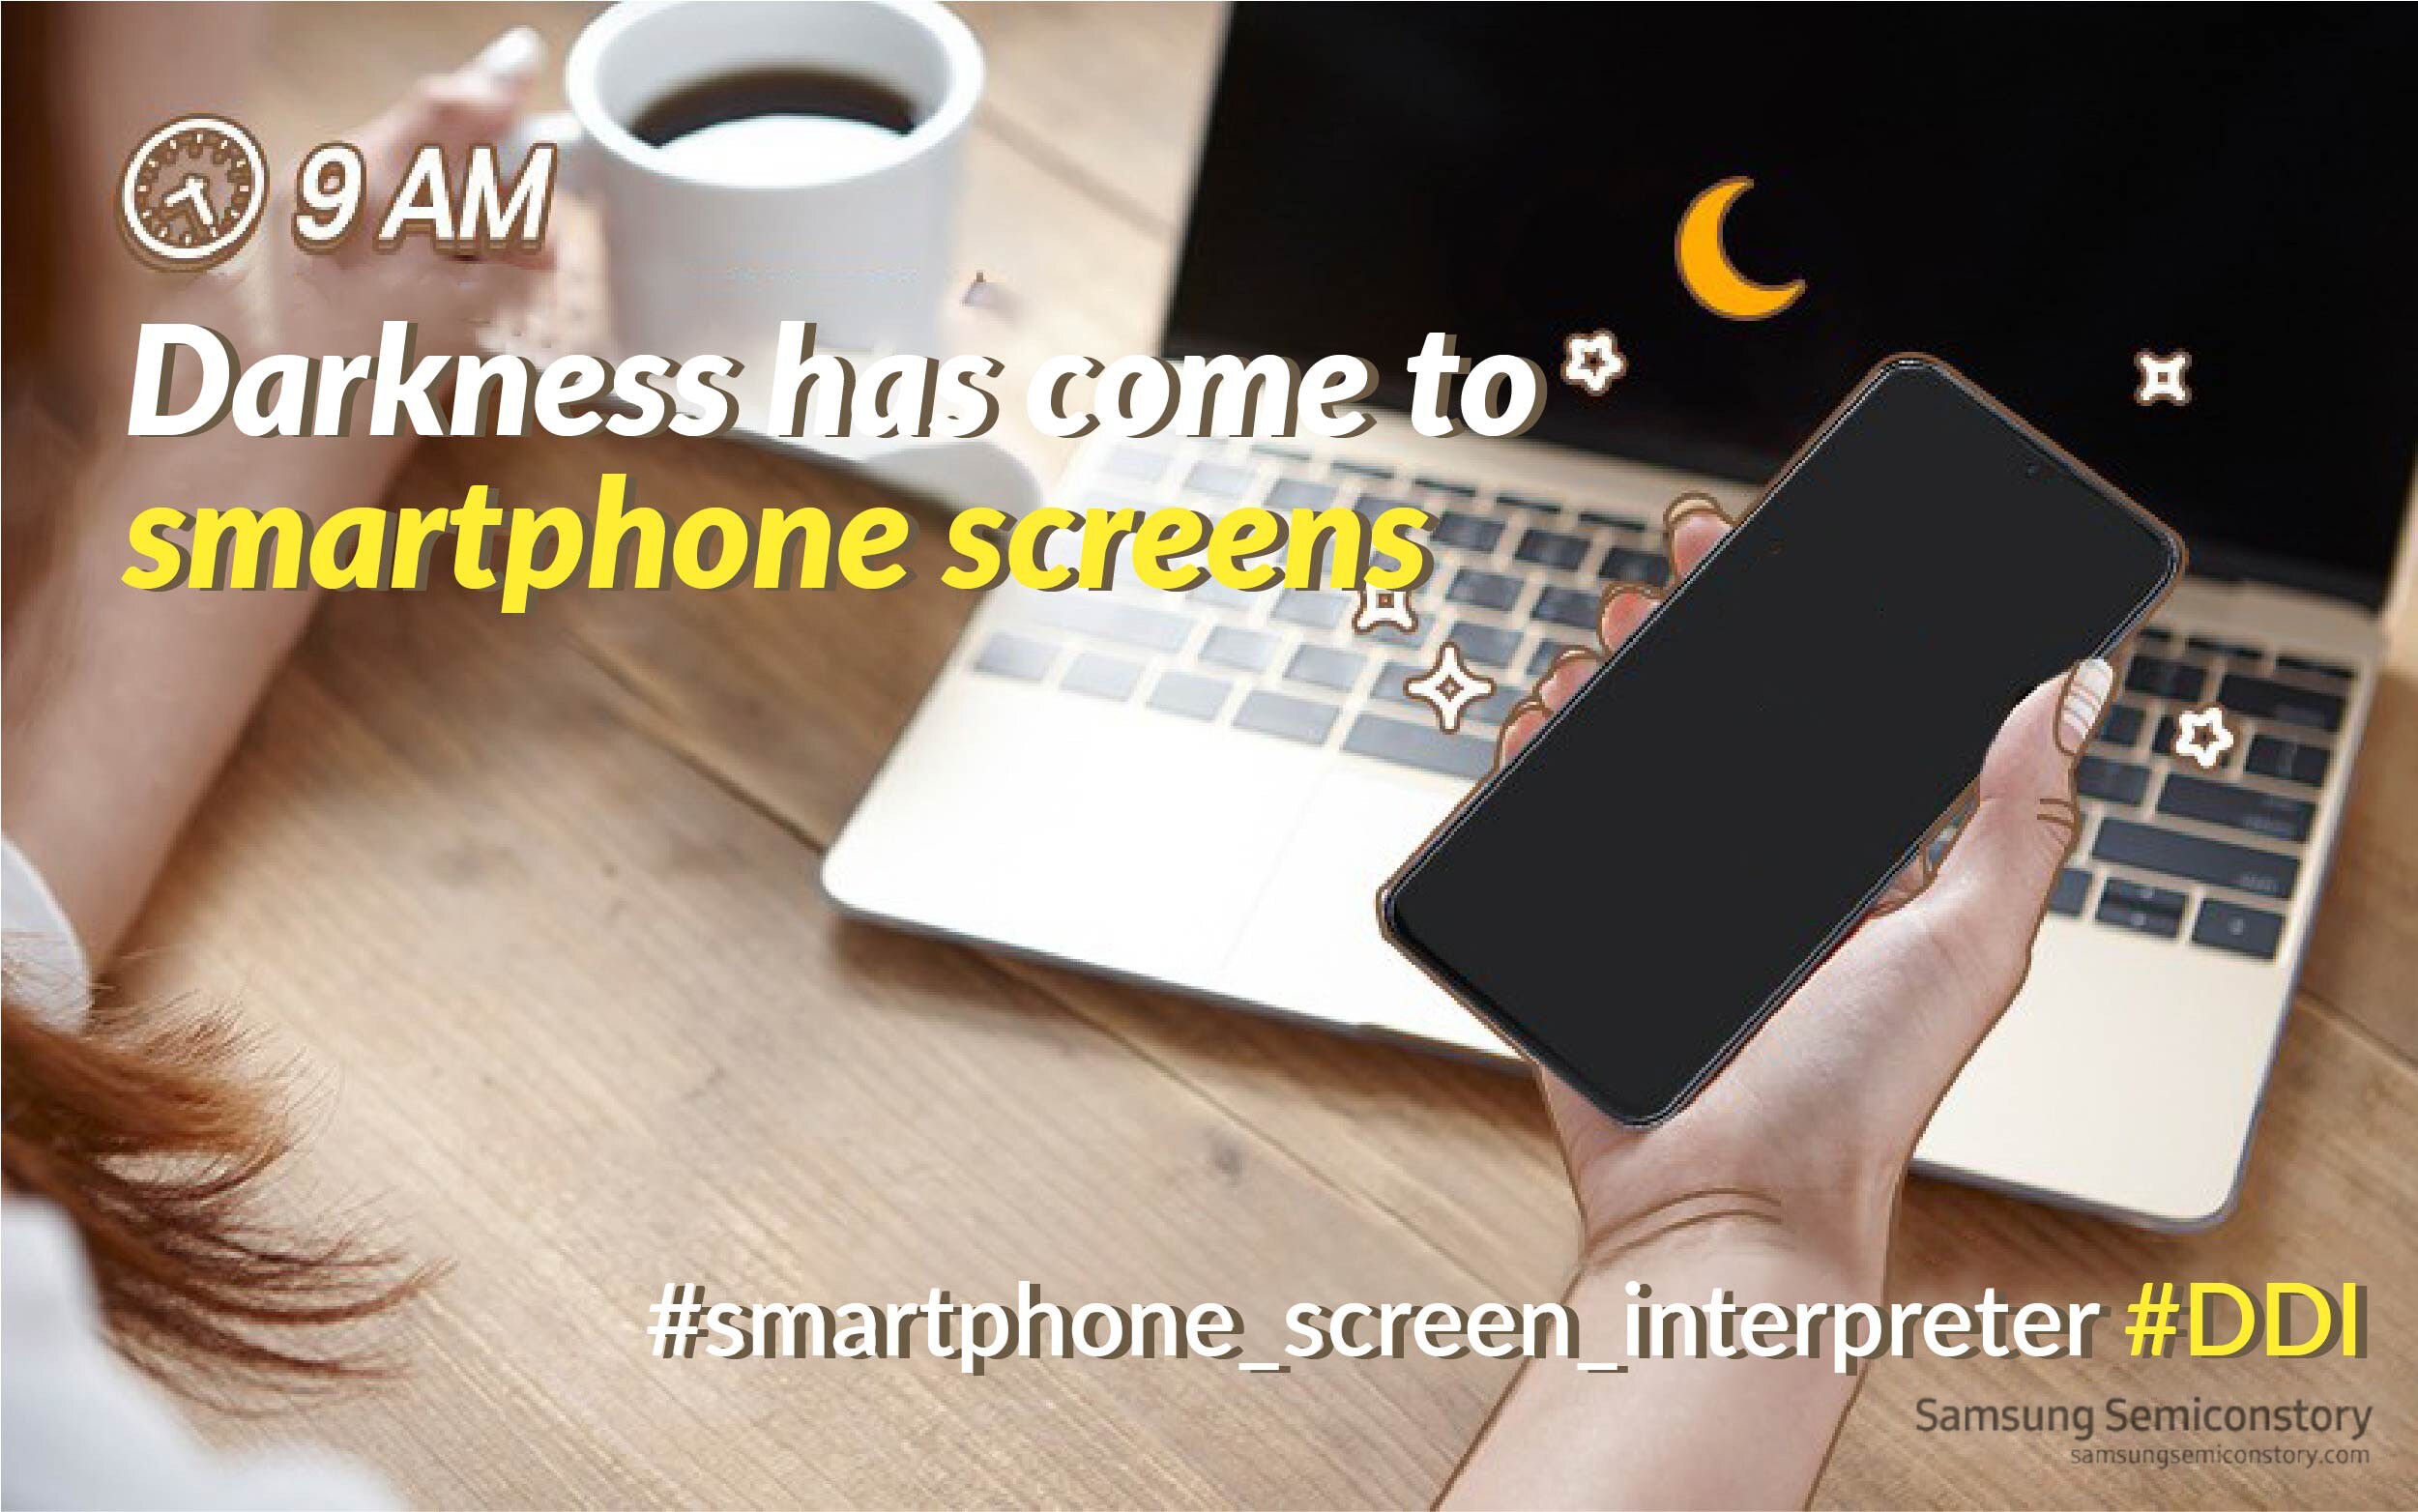 At 9am, darkness has come to smartphone screens without DDI 